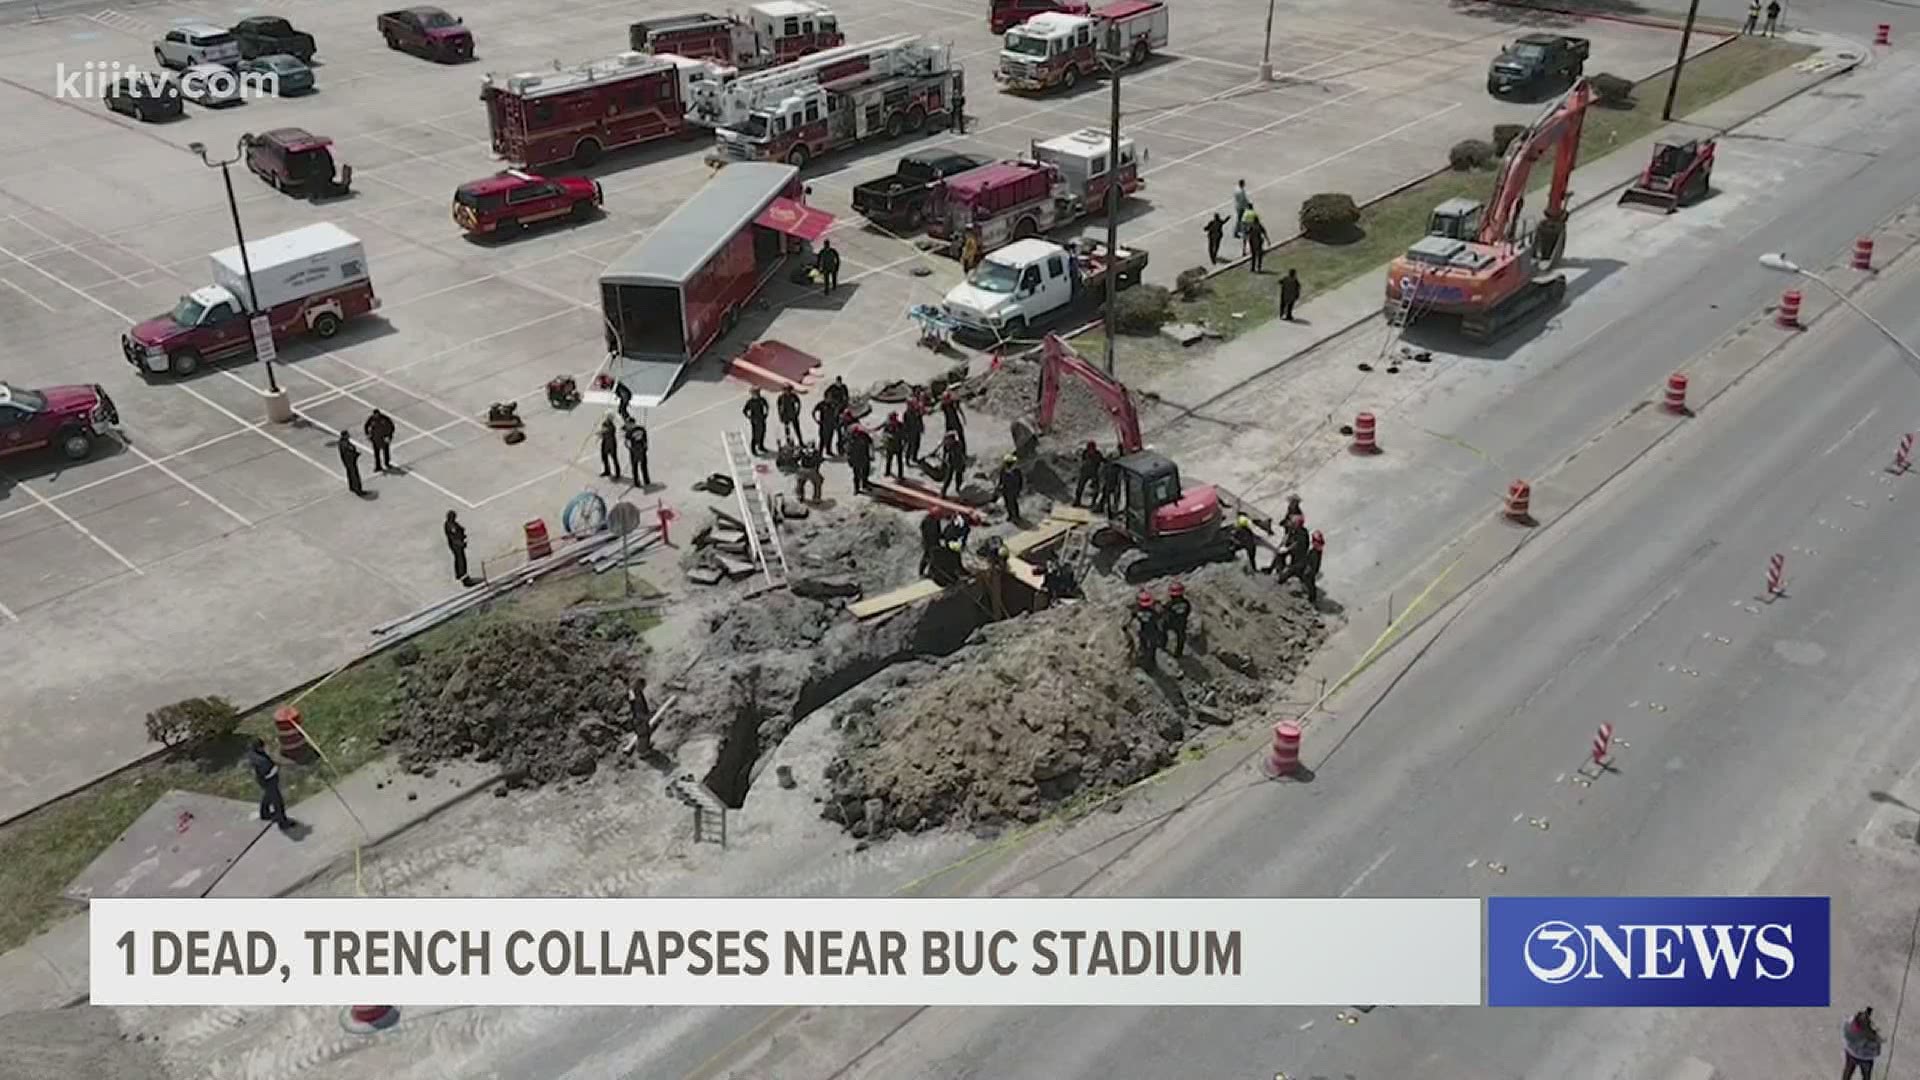 Corpus Christi Fire Chief Rocha is calling this a "horrible industrial accident."